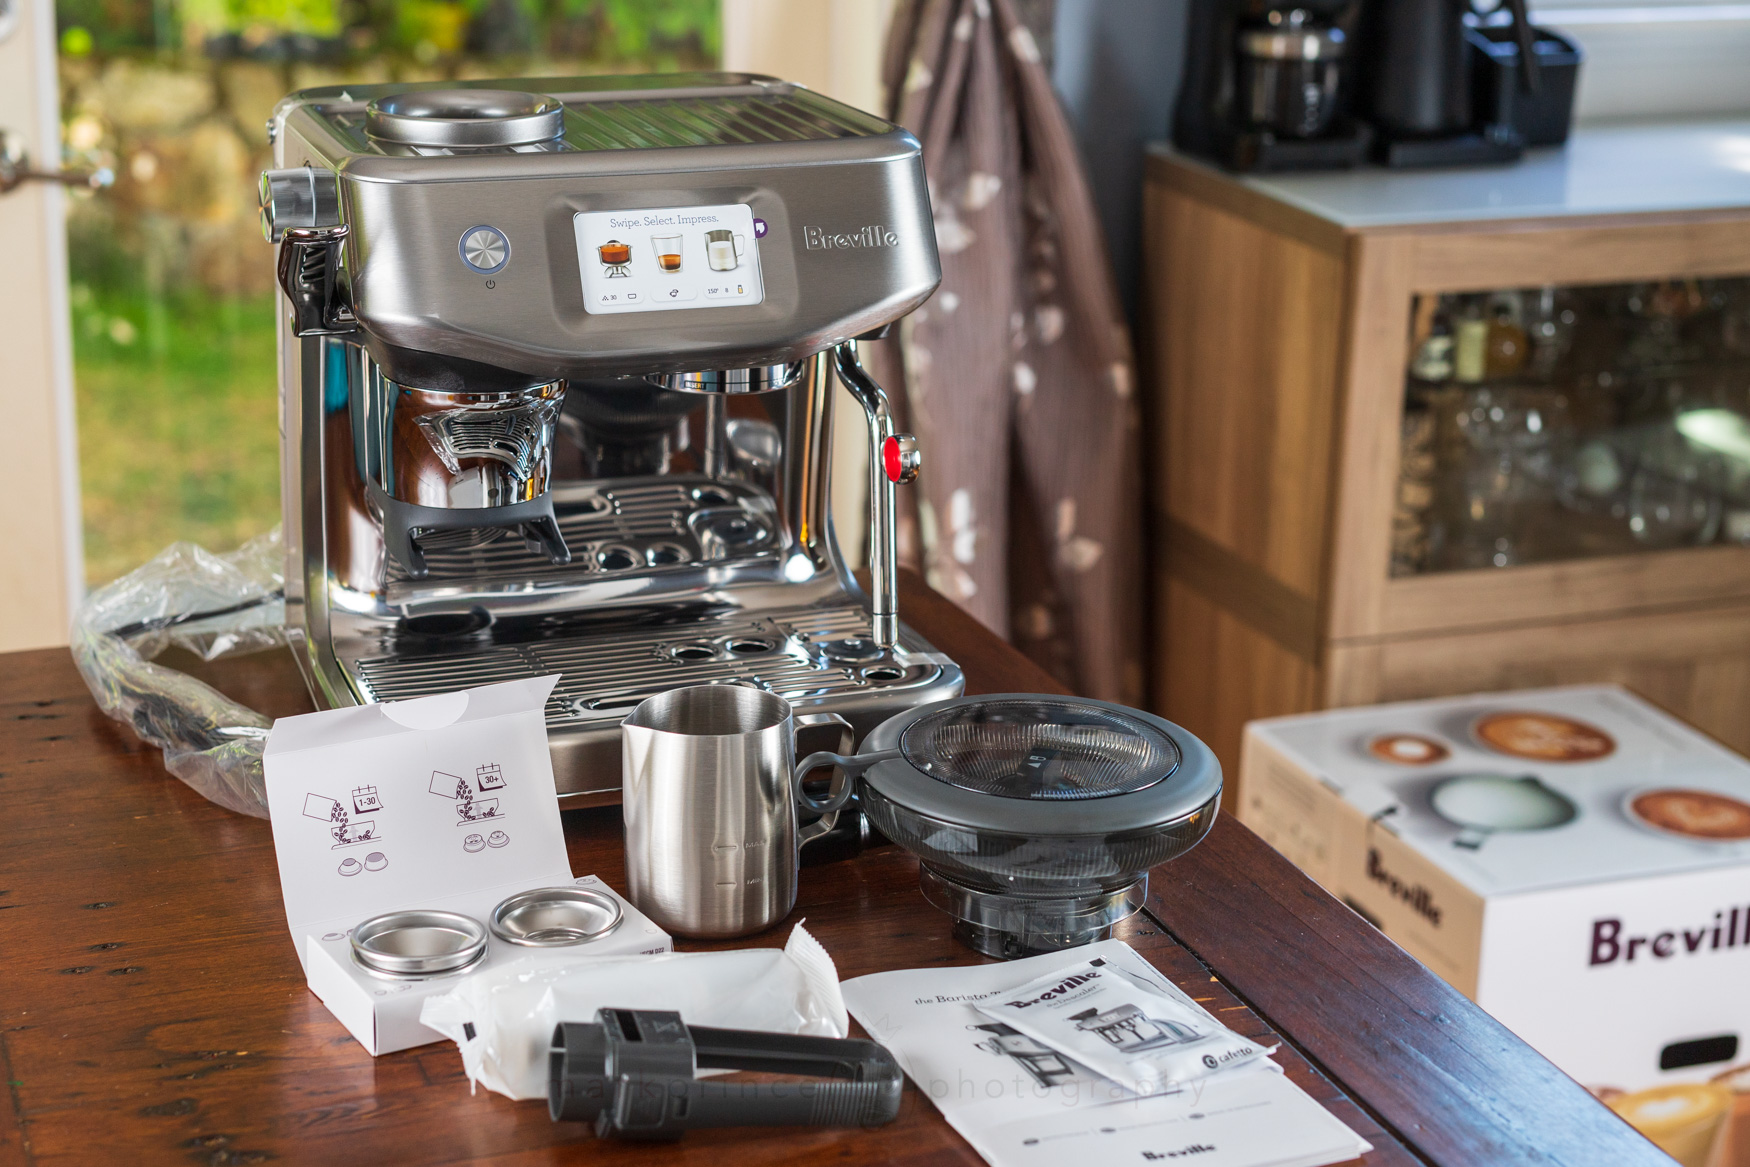 Sage's Barista Touch Impress is a coffee machine for the ultimate